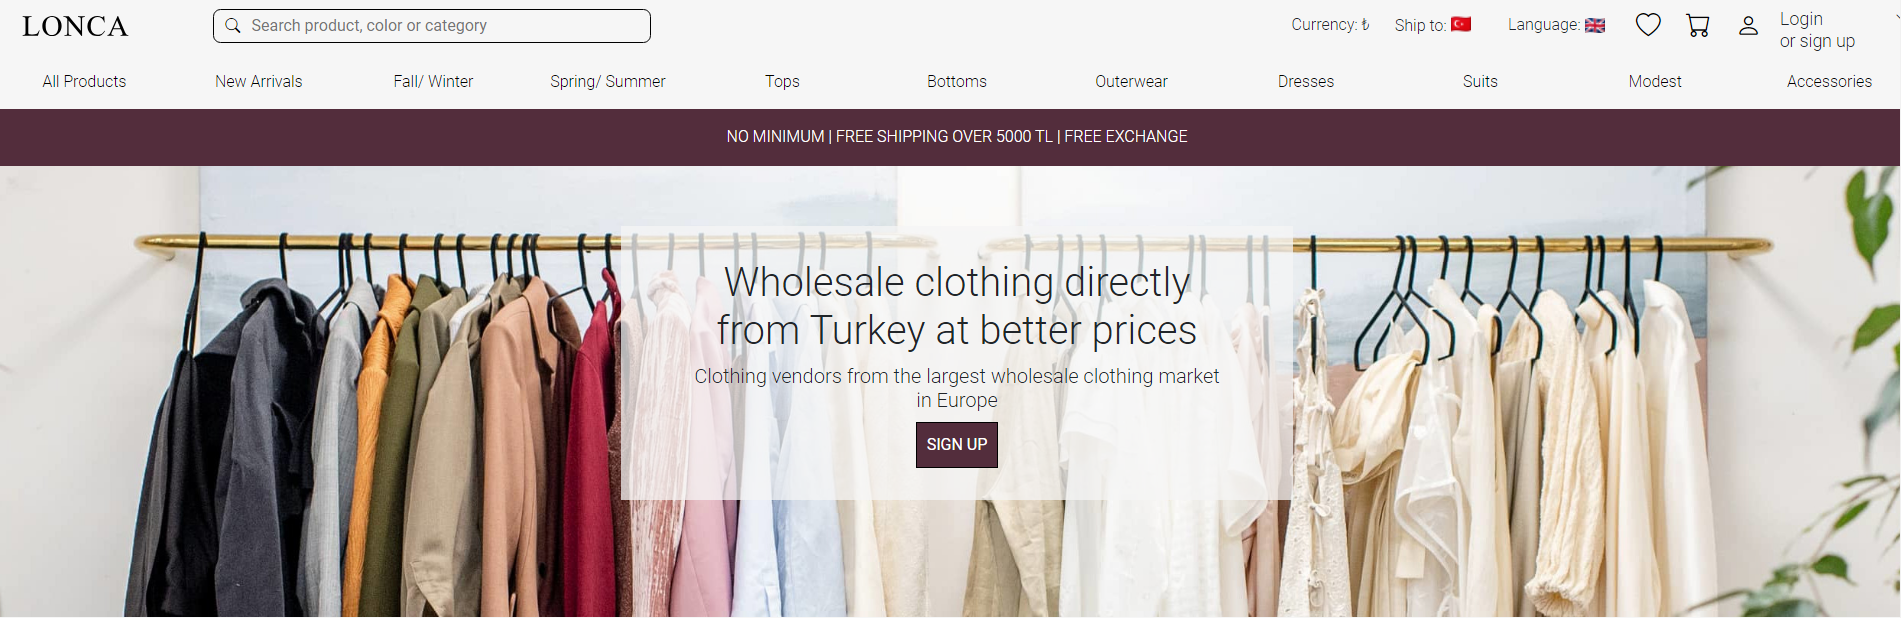 homepage of a wholesale clothing marketplace - Lonca